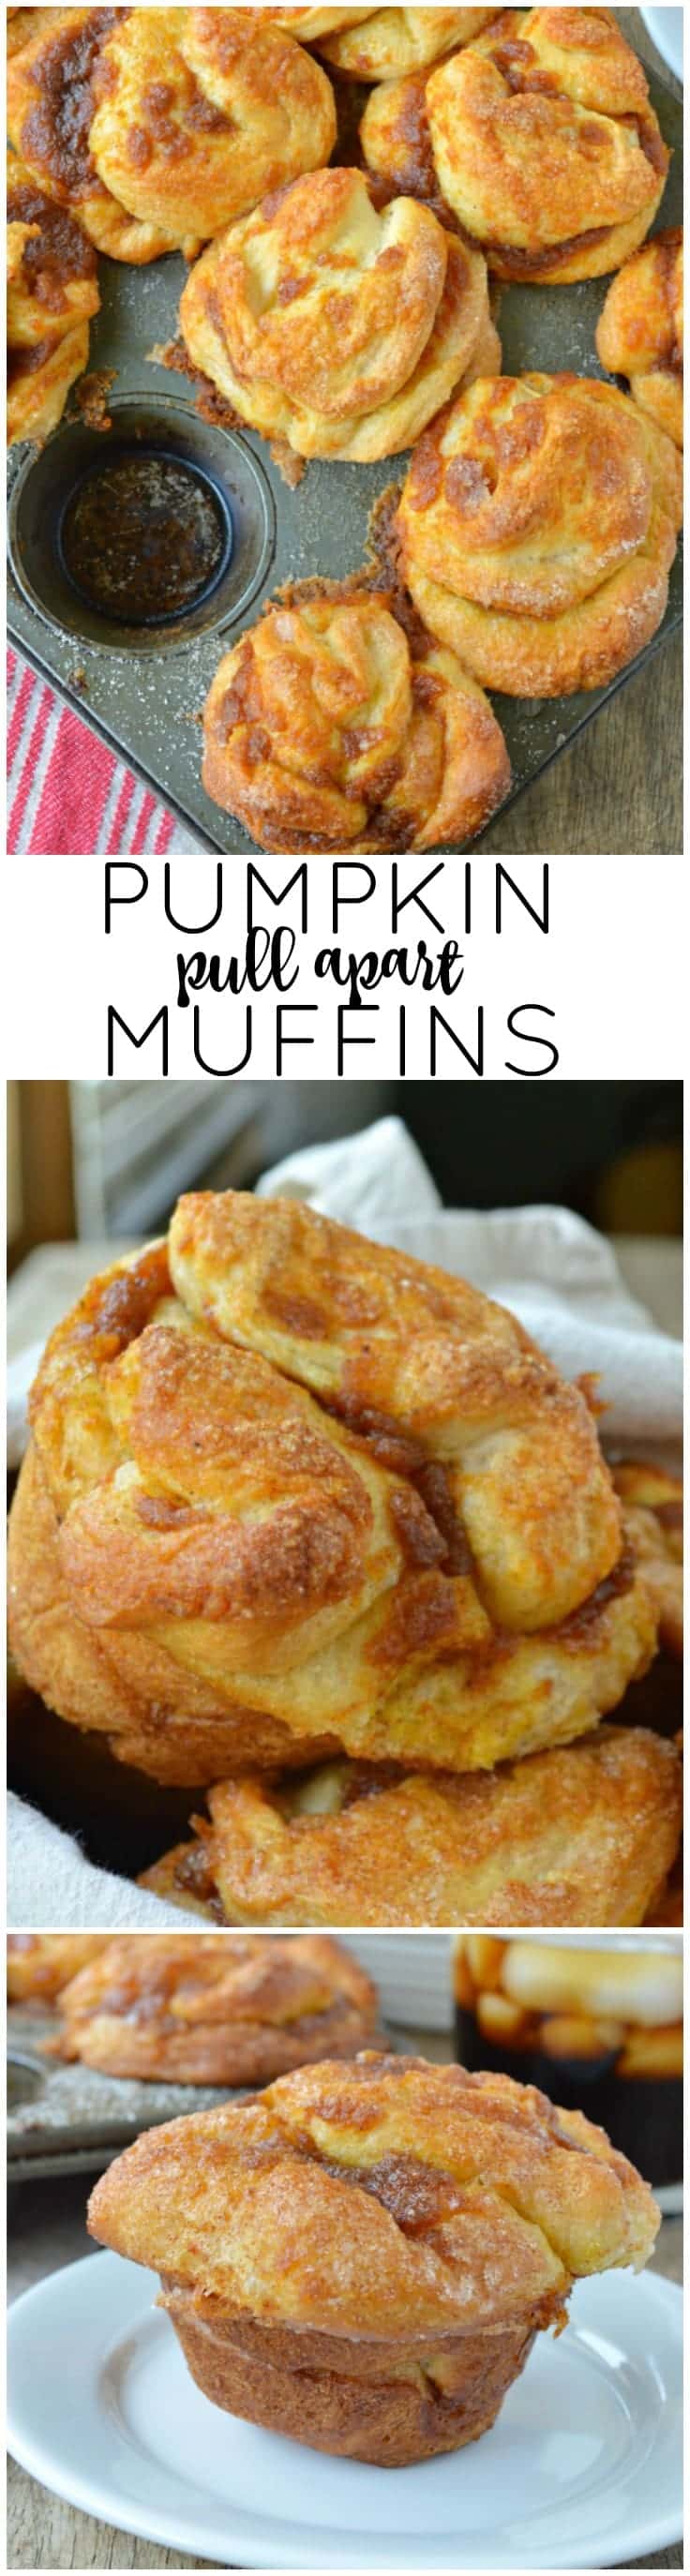 These Pumpkin Pull Apart Muffins are crazy easy. Like a mini version of monkey bread -- they start with refrigerated biscuits!